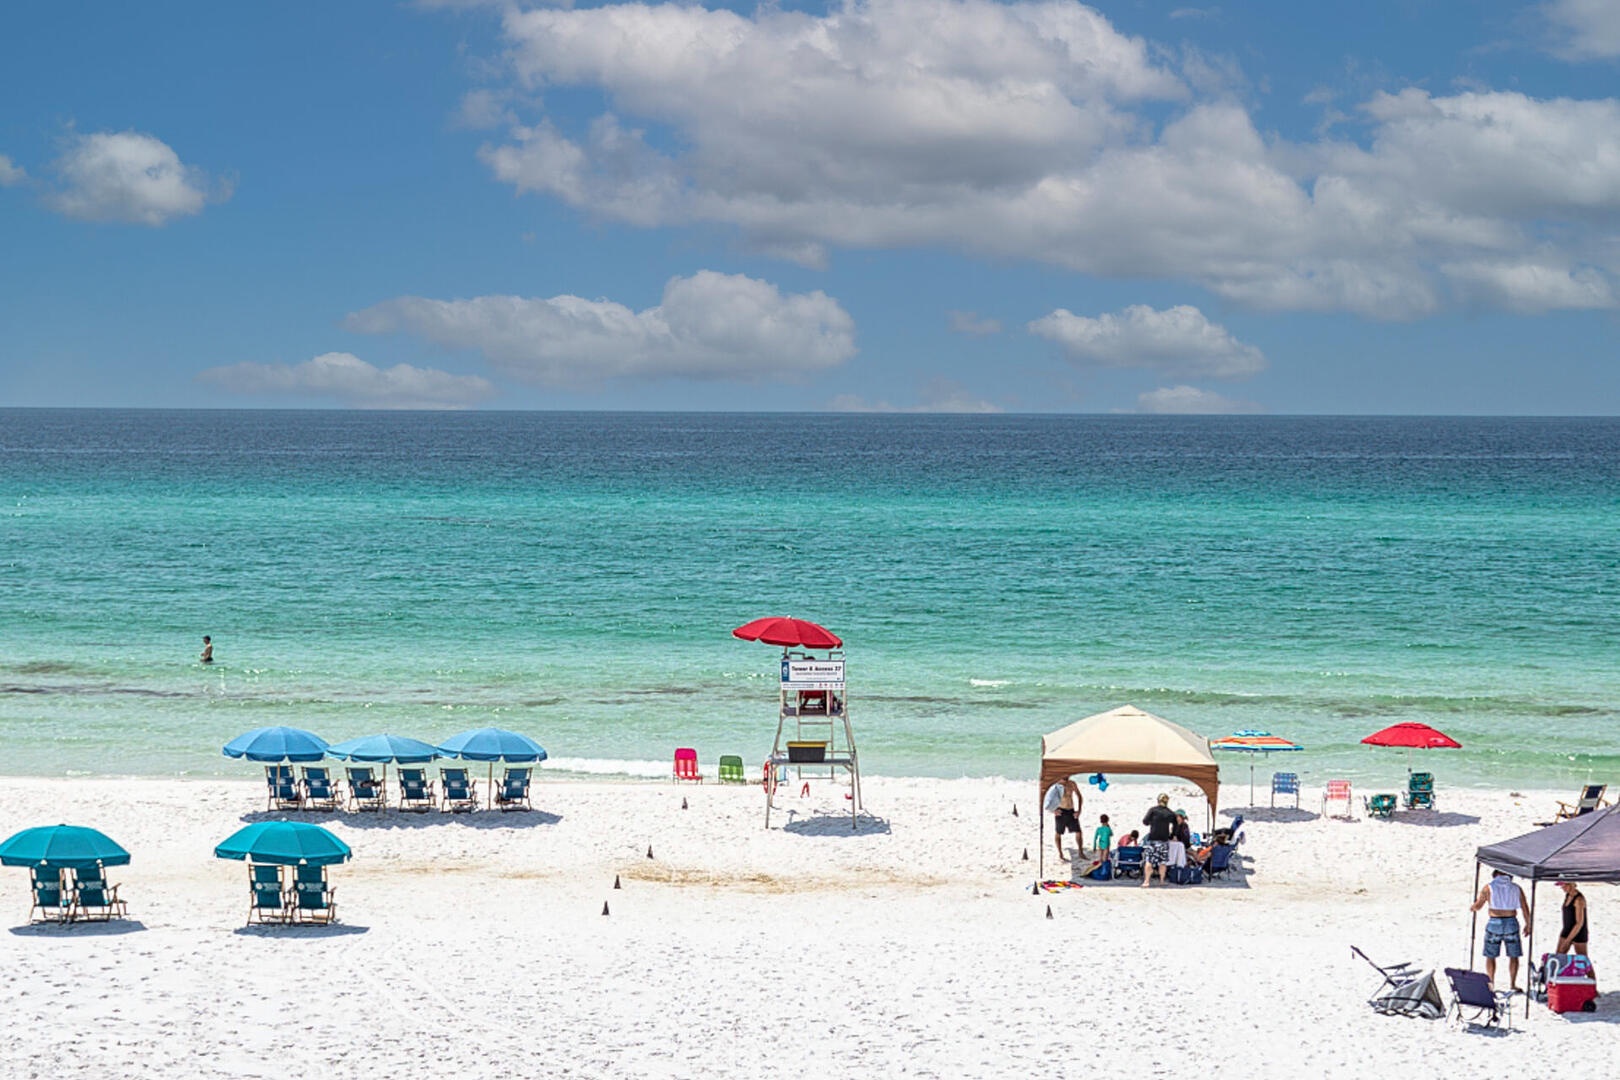 Sugar-white sands and emerald waters await!